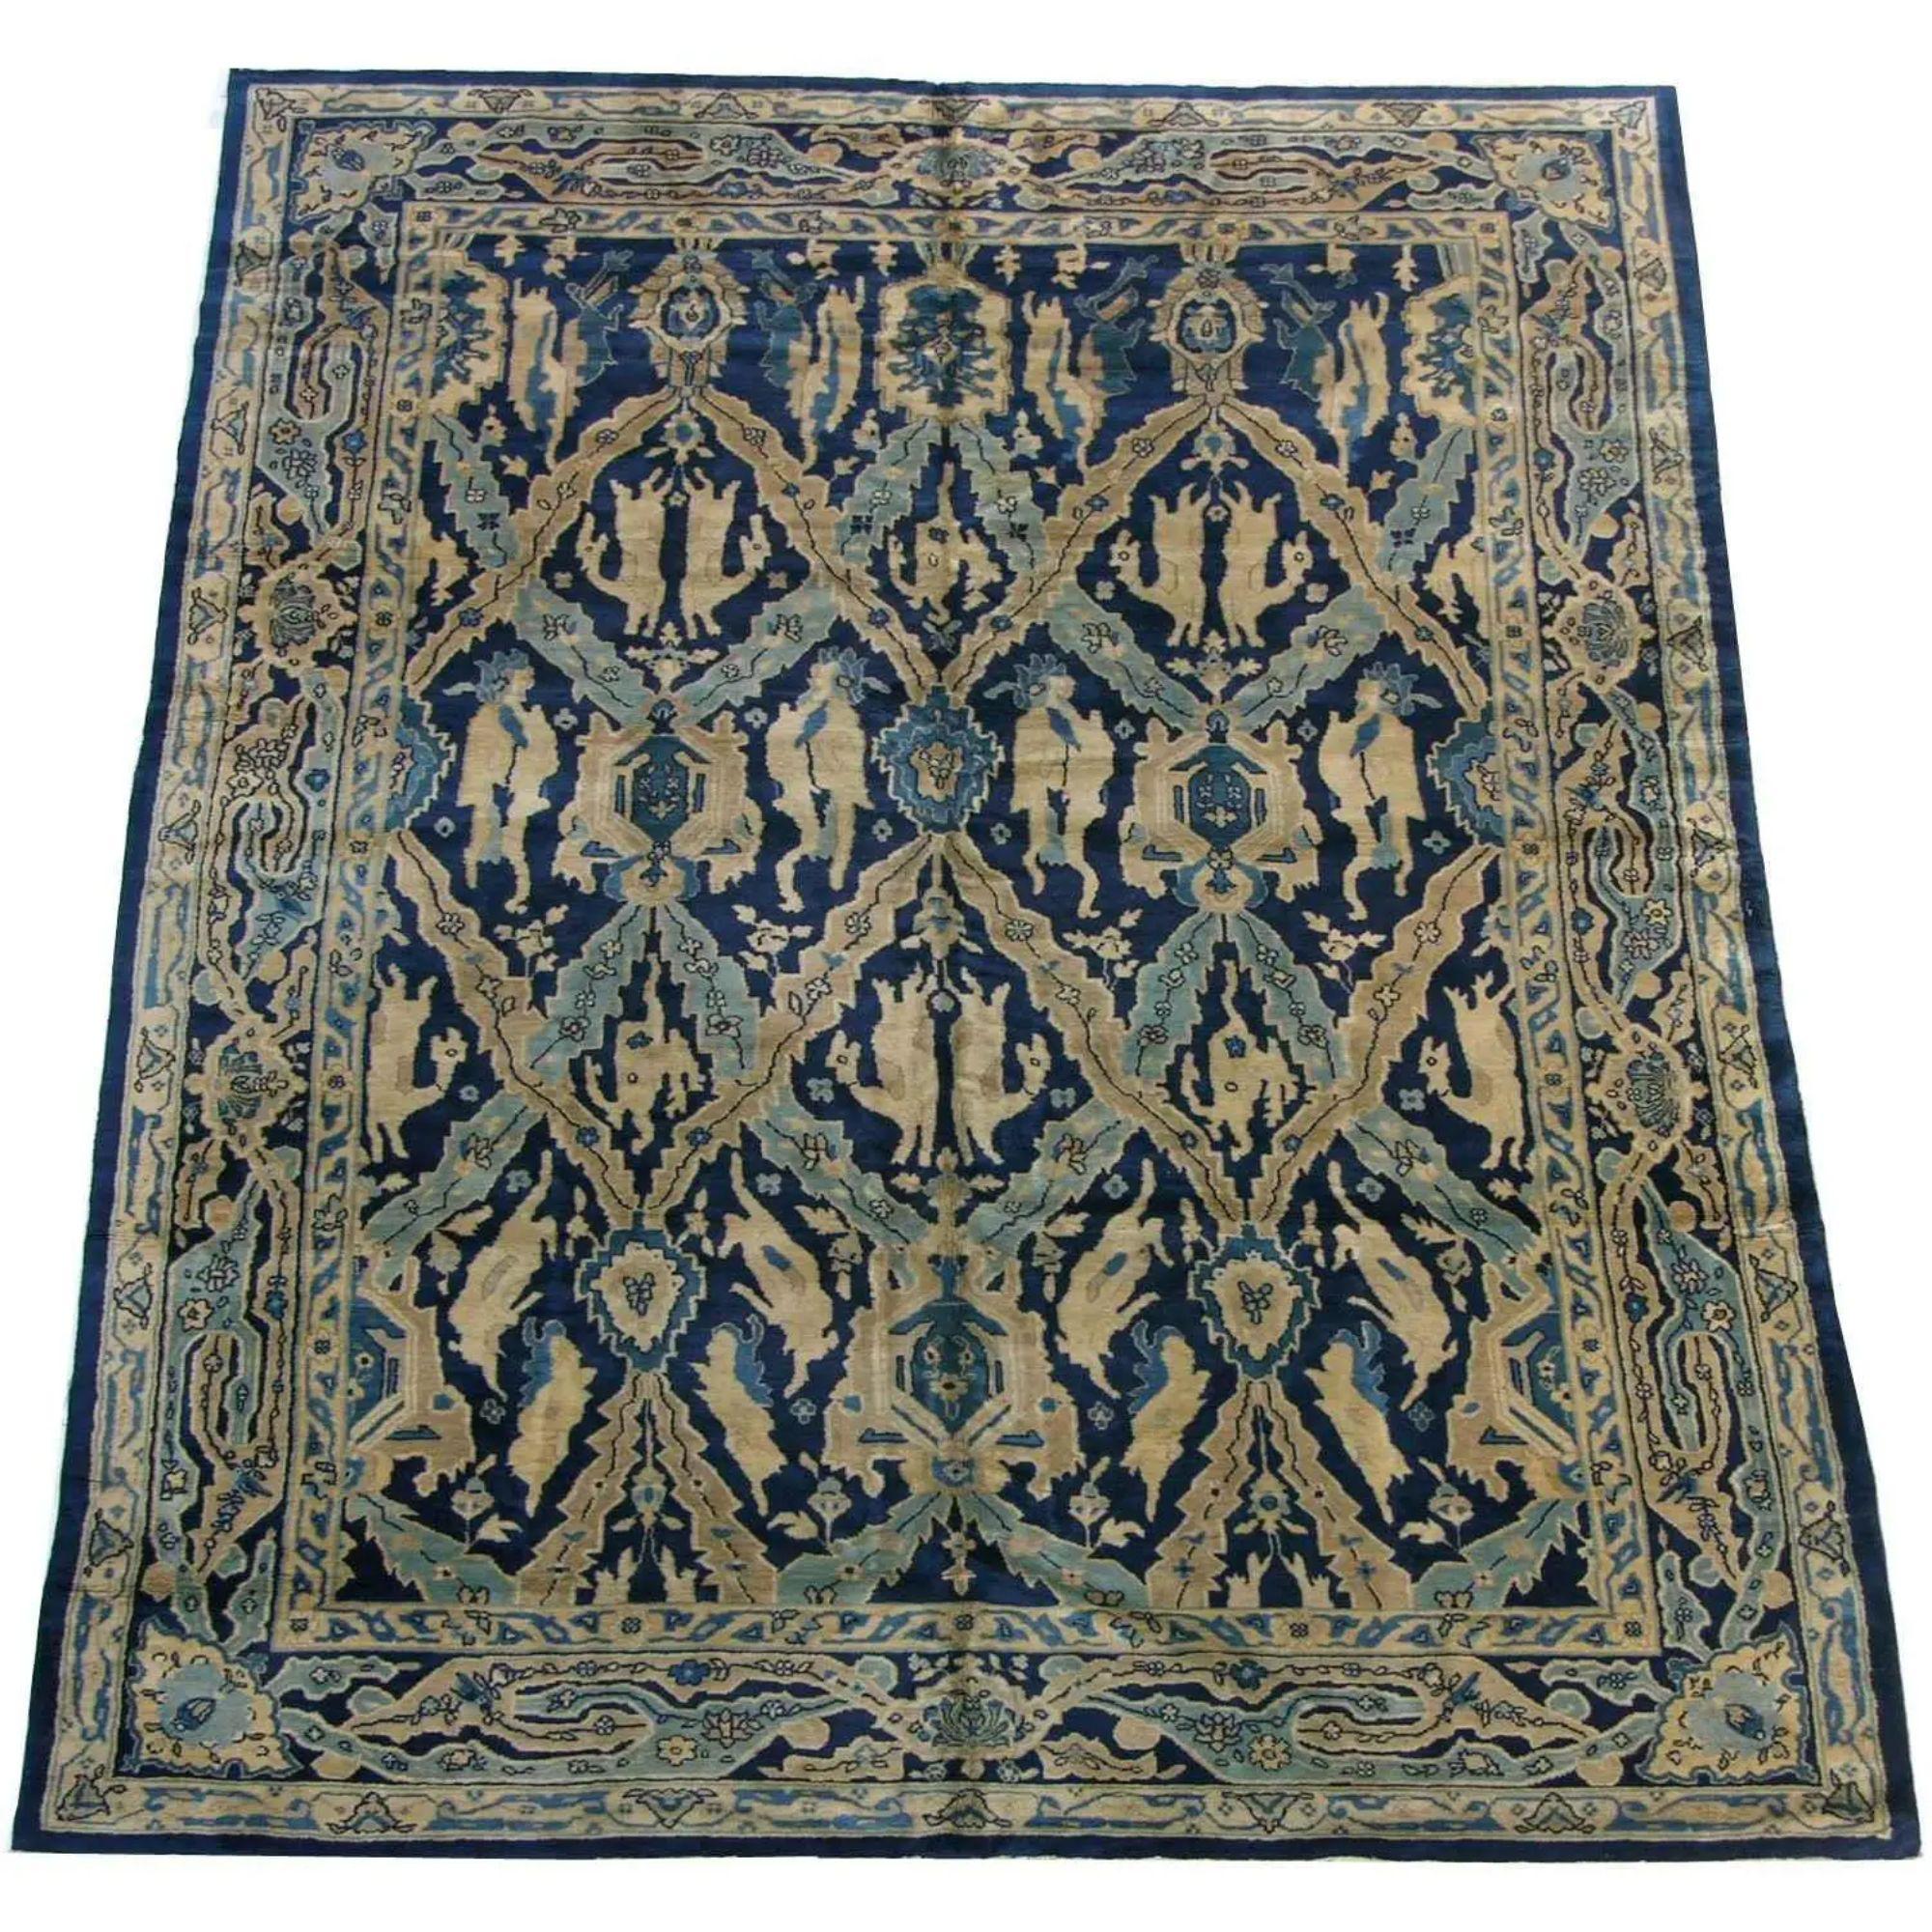 Early 20th Century 1900s Antique Chinese Rug - 11'8'' X 9'2'' For Sale